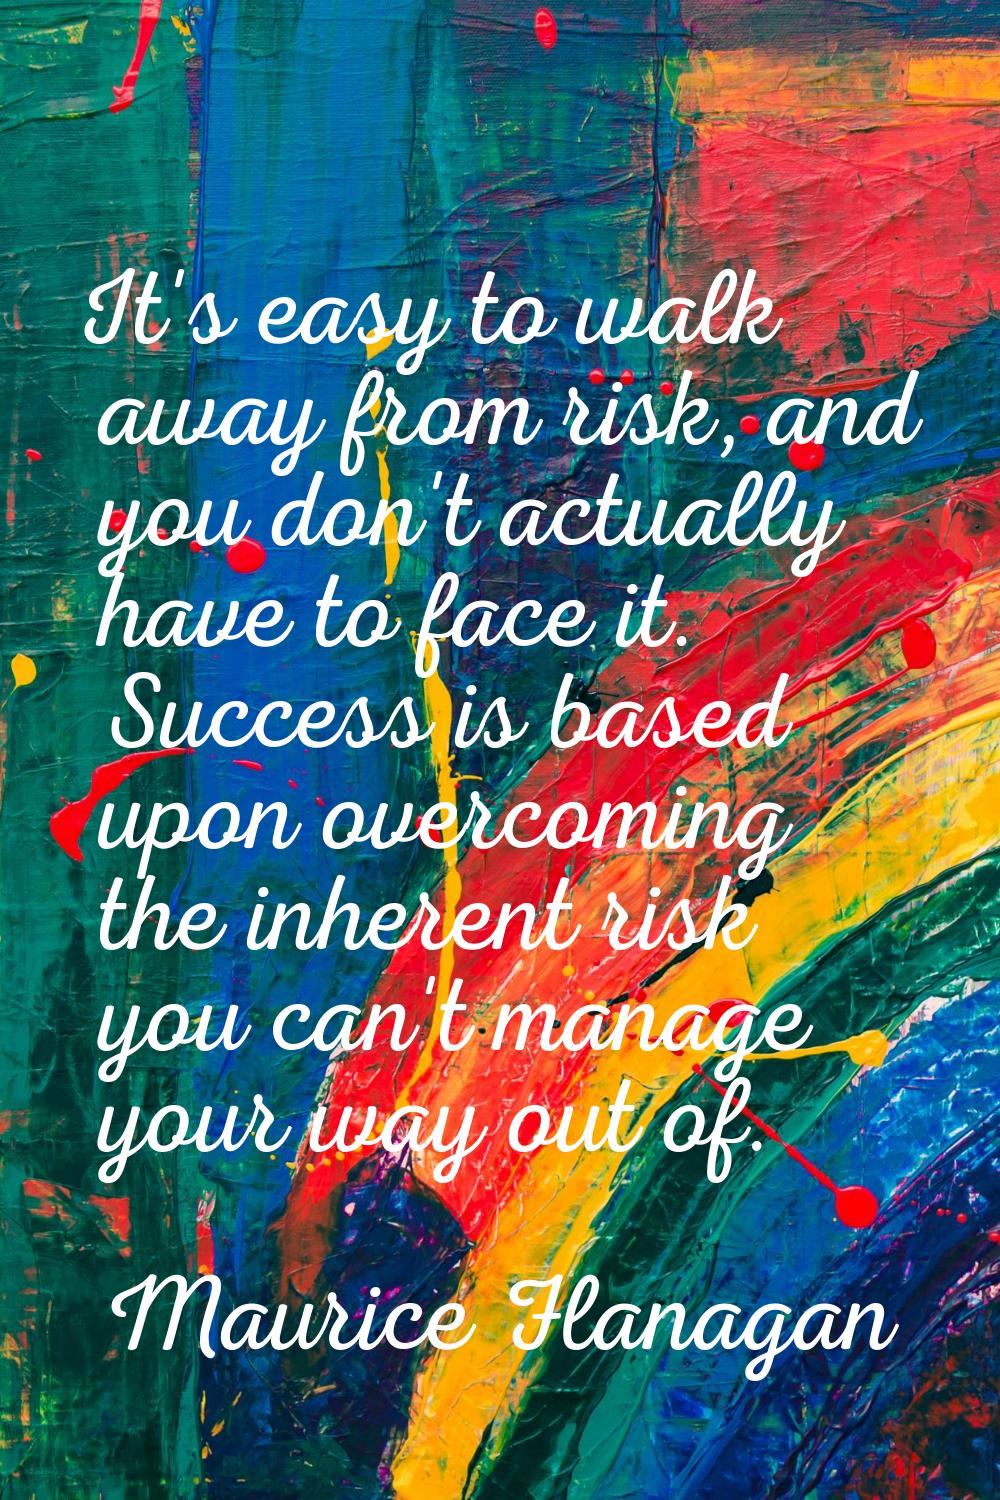 It's easy to walk away from risk, and you don't actually have to face it. Success is based upon ove